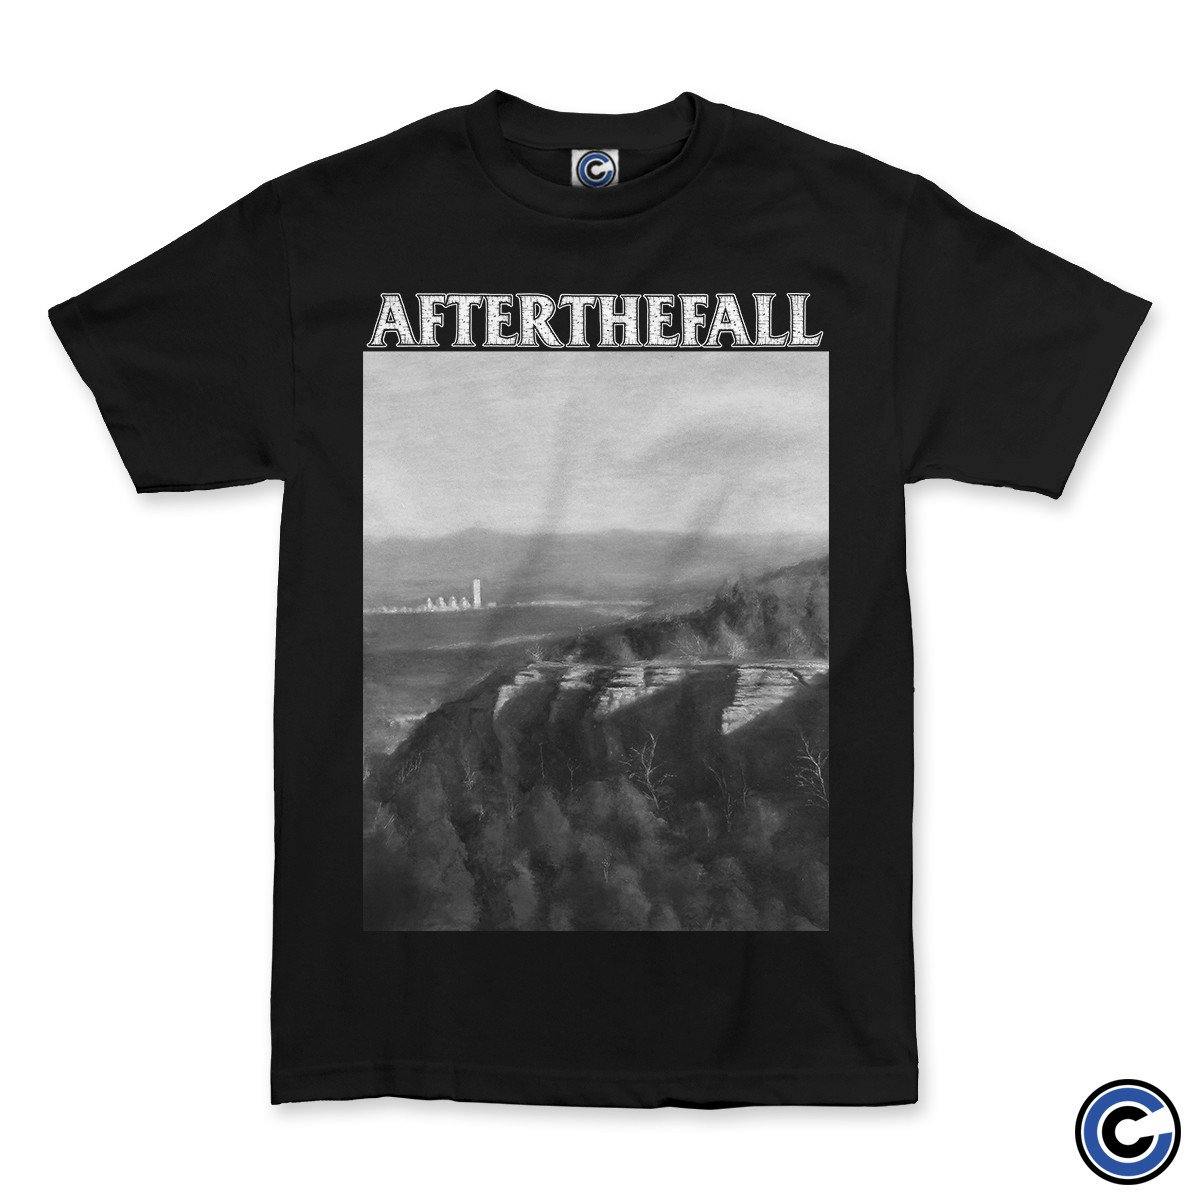 Buy – After the Fall "Landscape" Shirt – Band & Music Merch – Cold Cuts Merch